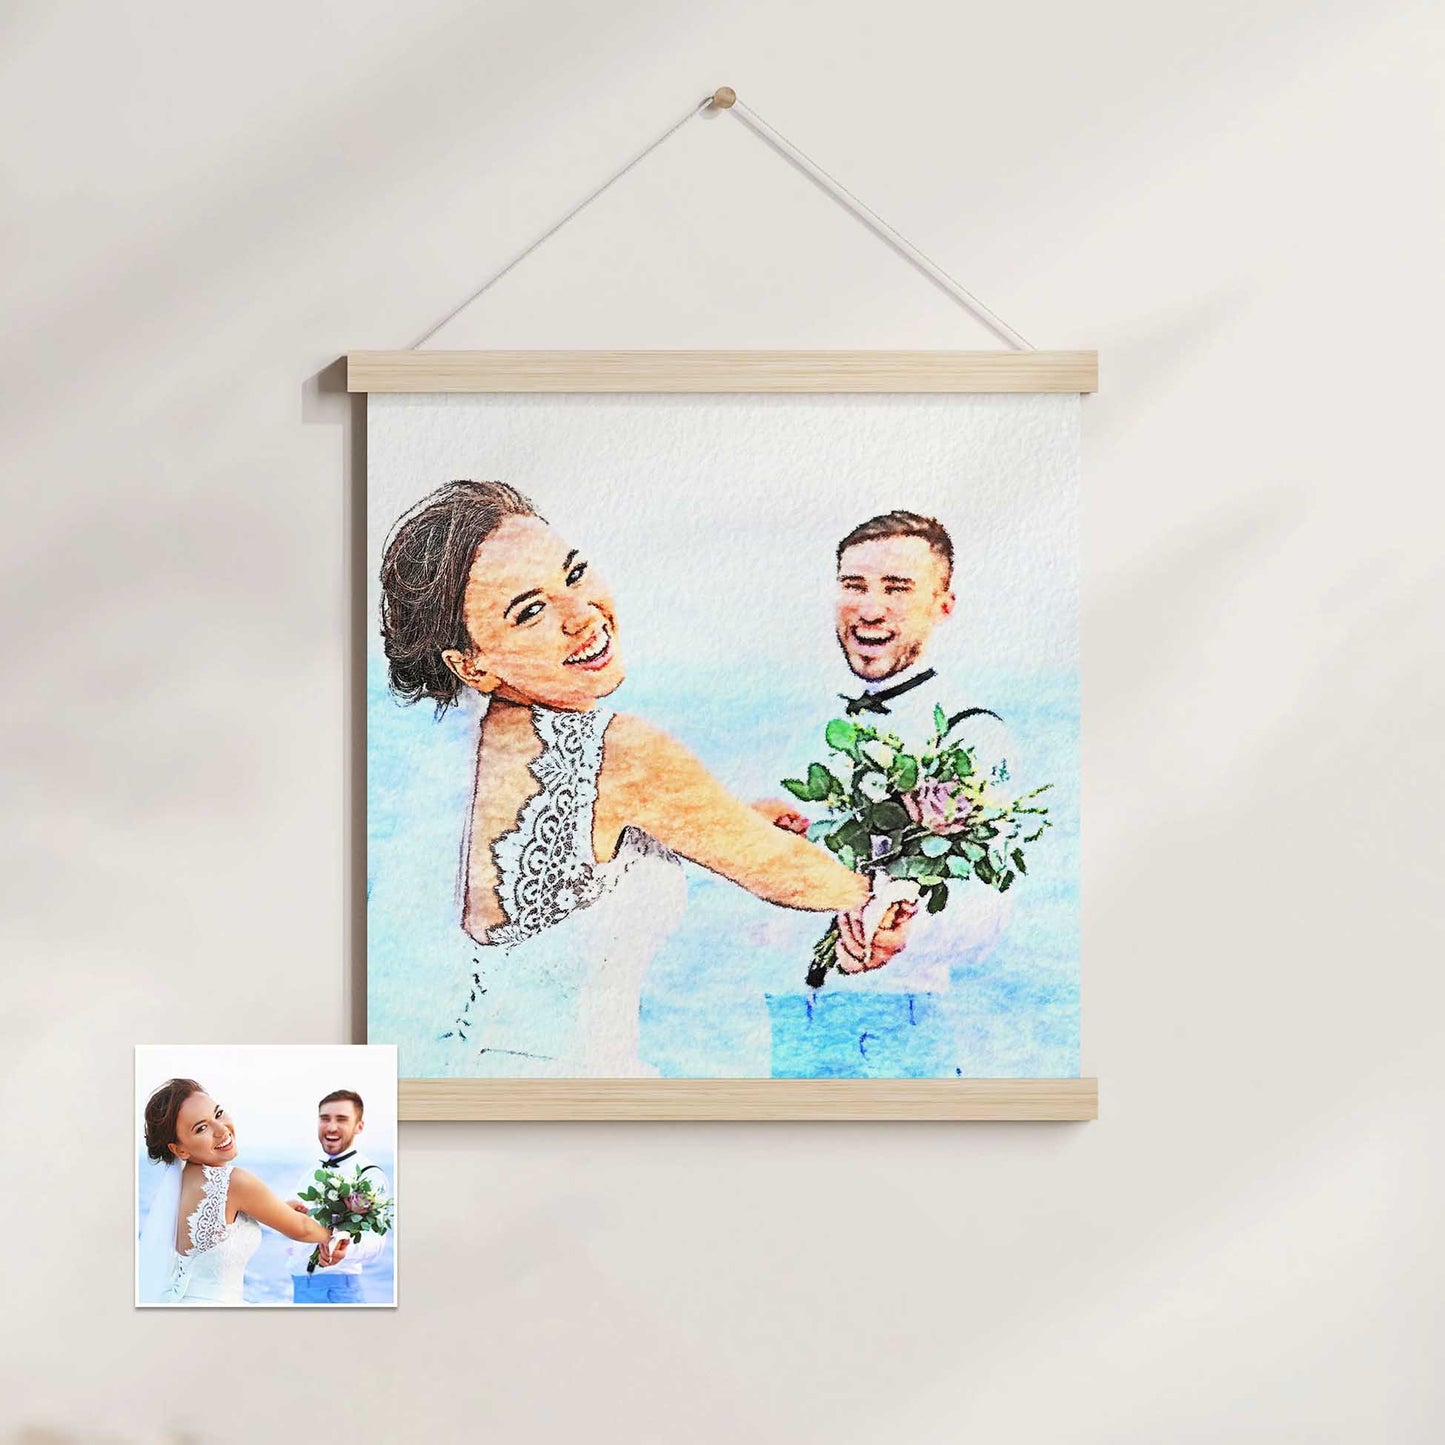 Add a touch of artistic charm to your home with our Personalised Watercolor Painting Poster Hanger. Made in a captivating watercolour style with a traditional effect, it brings vibrant and real artwork to your walls. Created from your photo